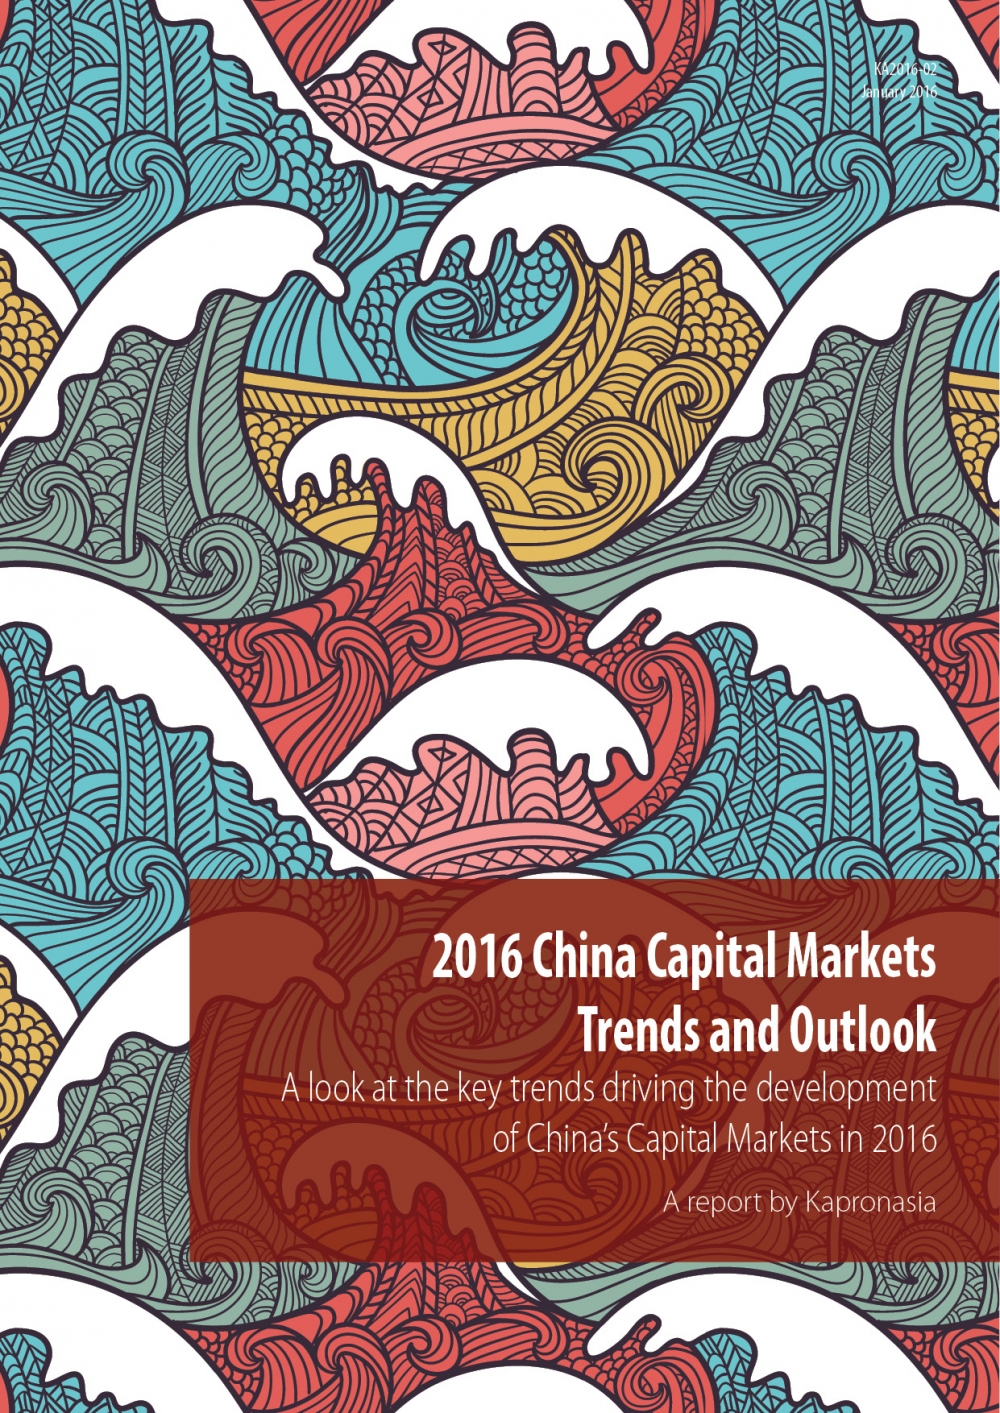 2016 China Capital Markets Trends and Outlook